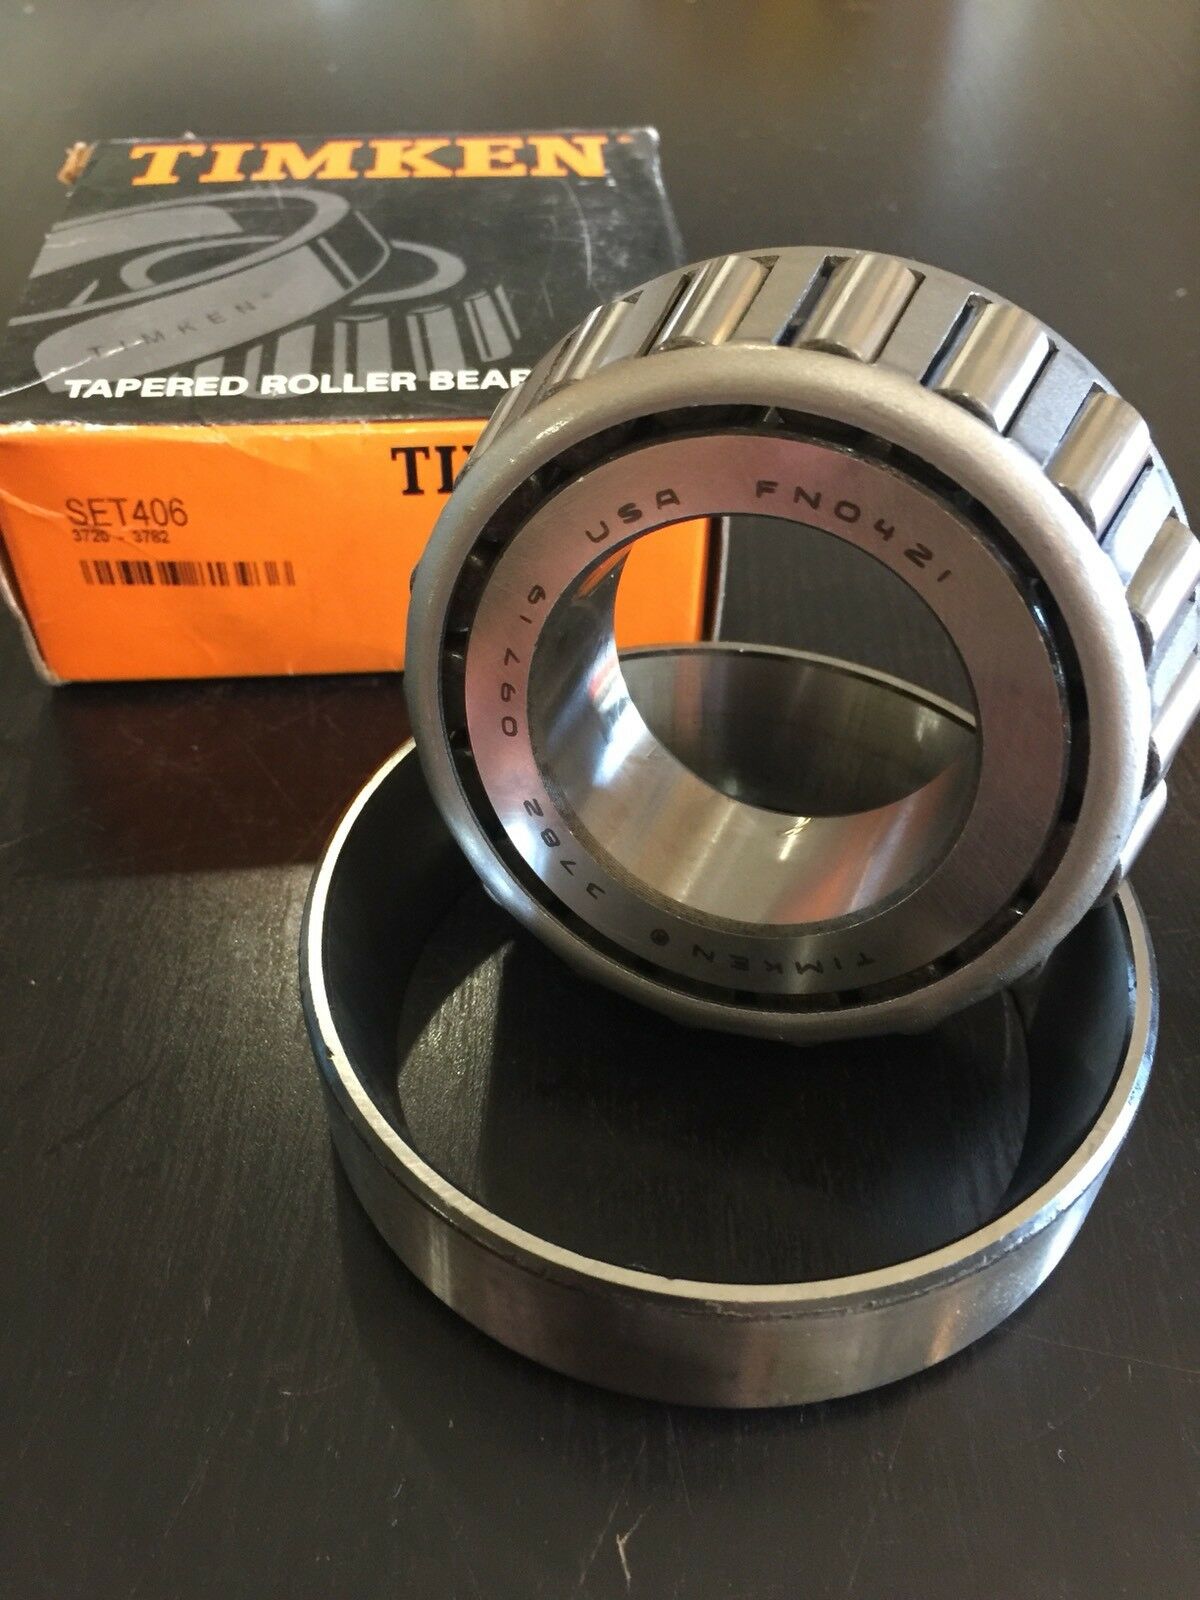 3782/3720 Tapered Roller Bearing 3782 Bearing & 3720 Race Premium NEW 1 Qty 